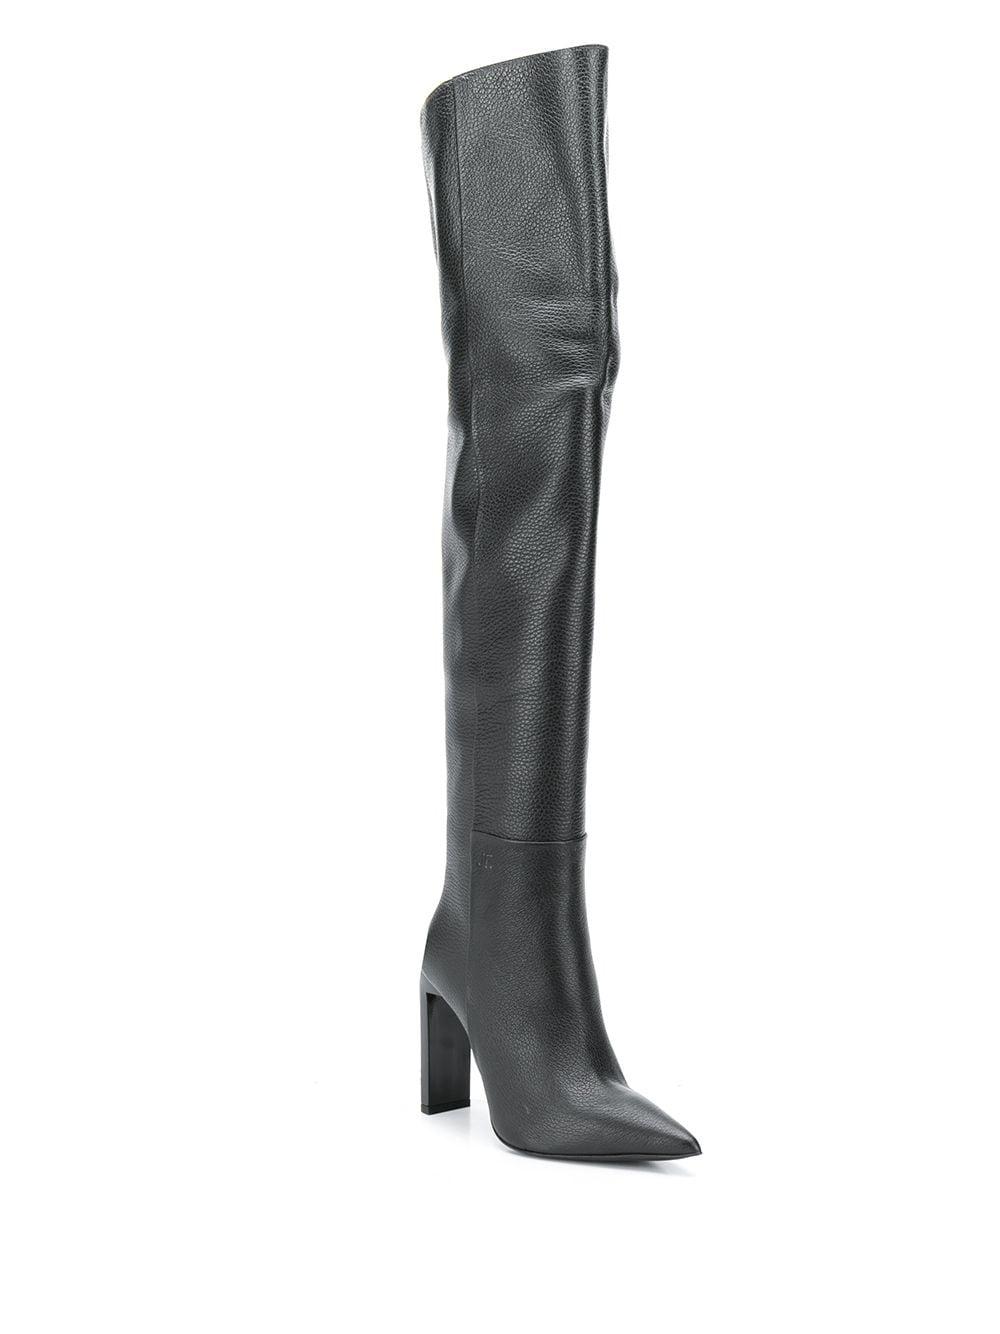 Just Cavalli Leather 100mm Thigh High Boots in Black - Lyst